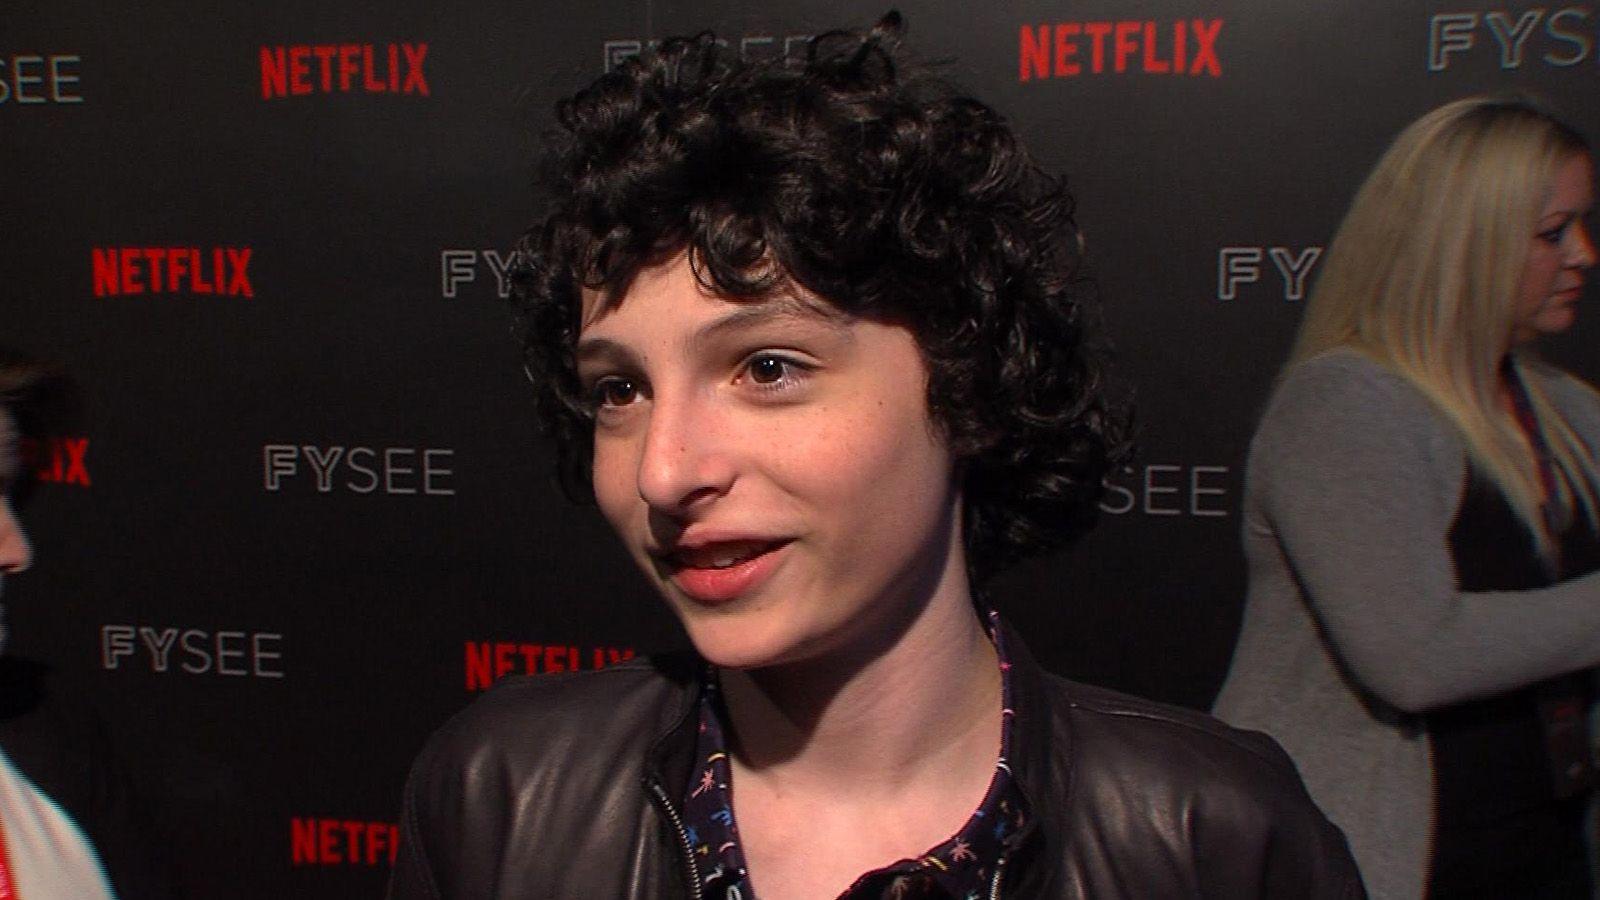 Watch Access Hollywood 'Stranger Things': Finn Wolfhard On